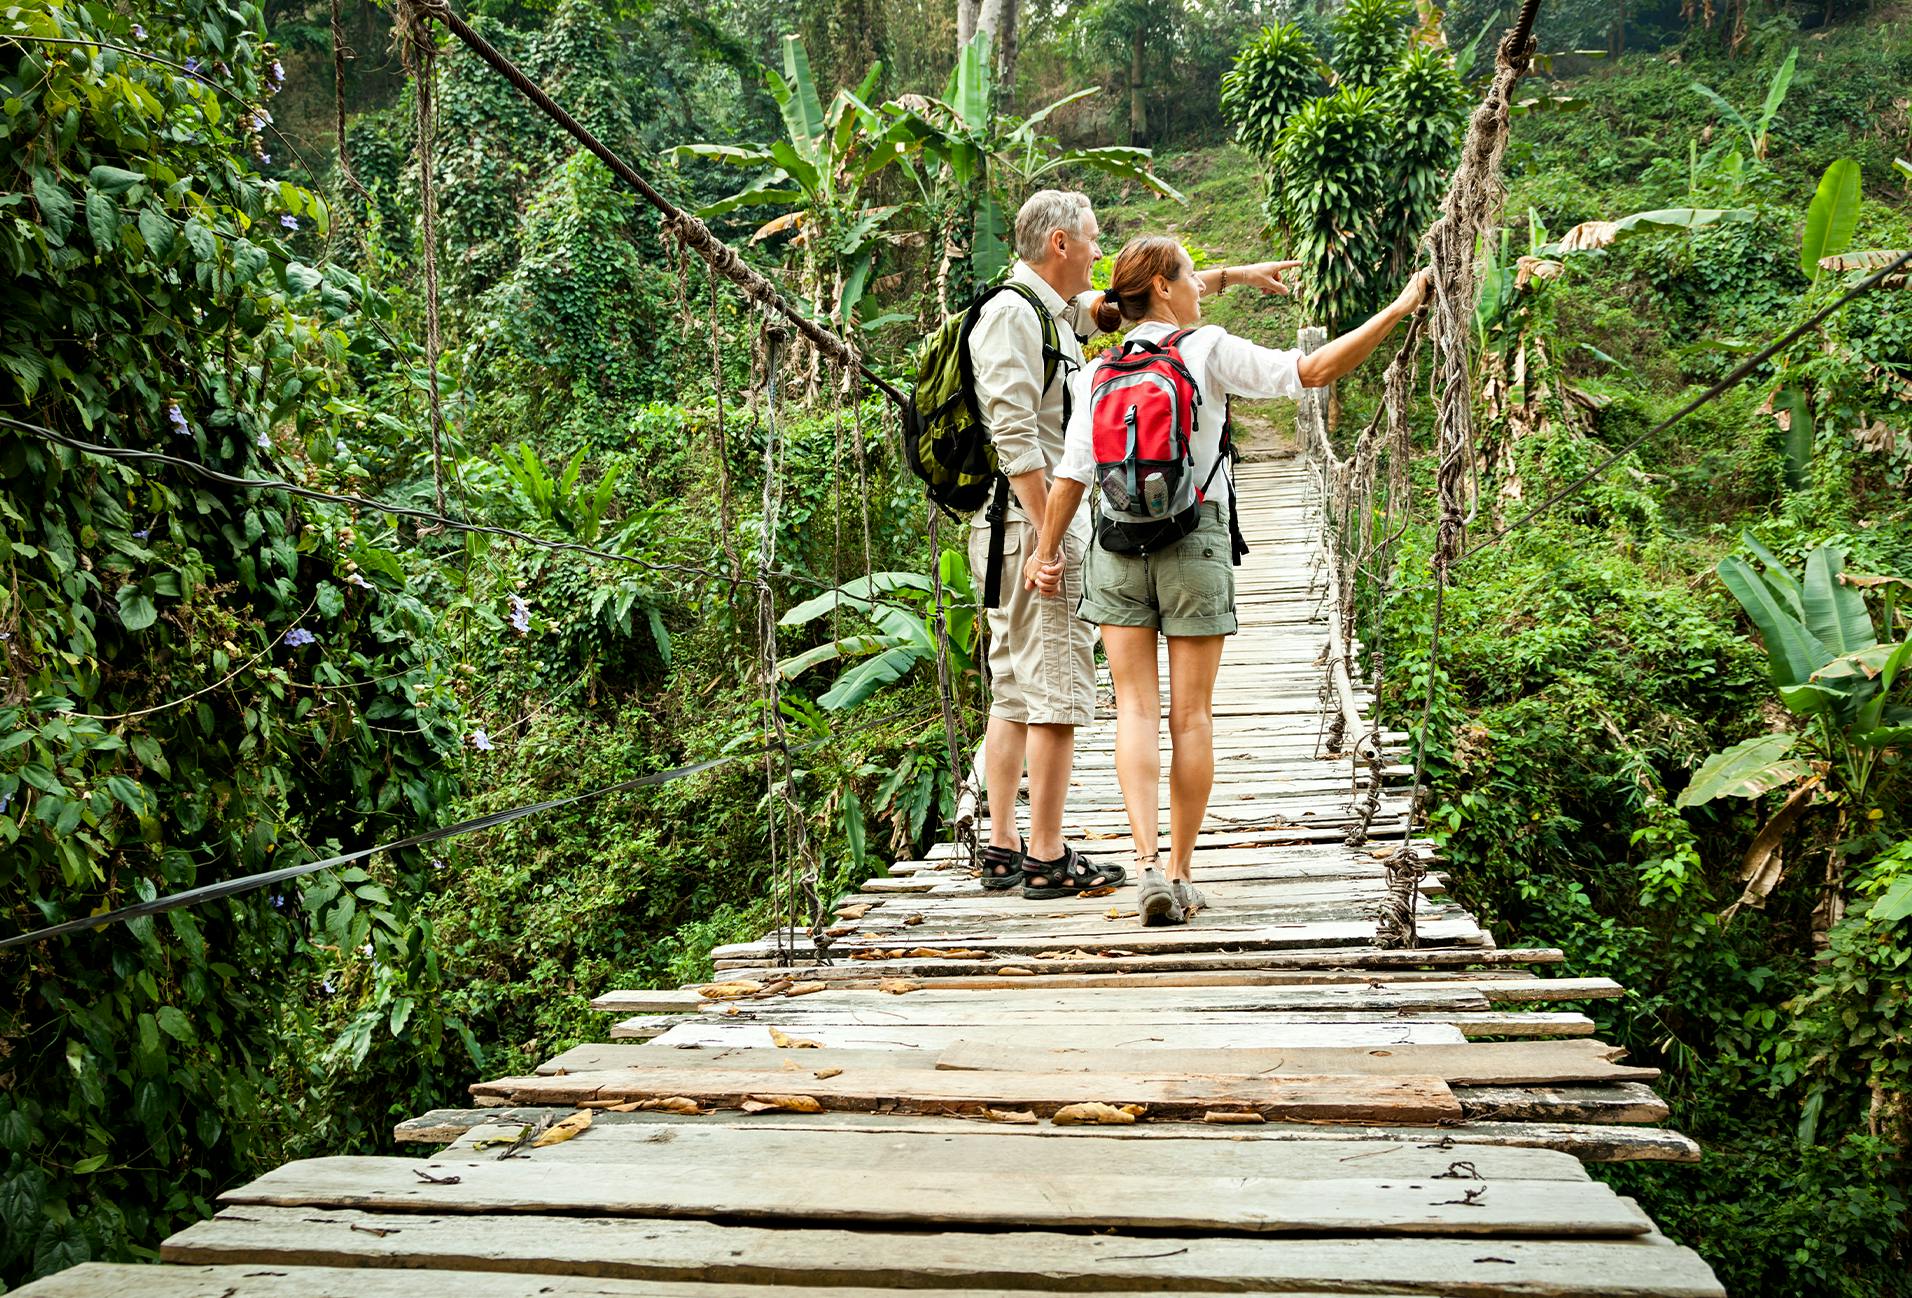 there are two people walking on a wooden bridge in the woods